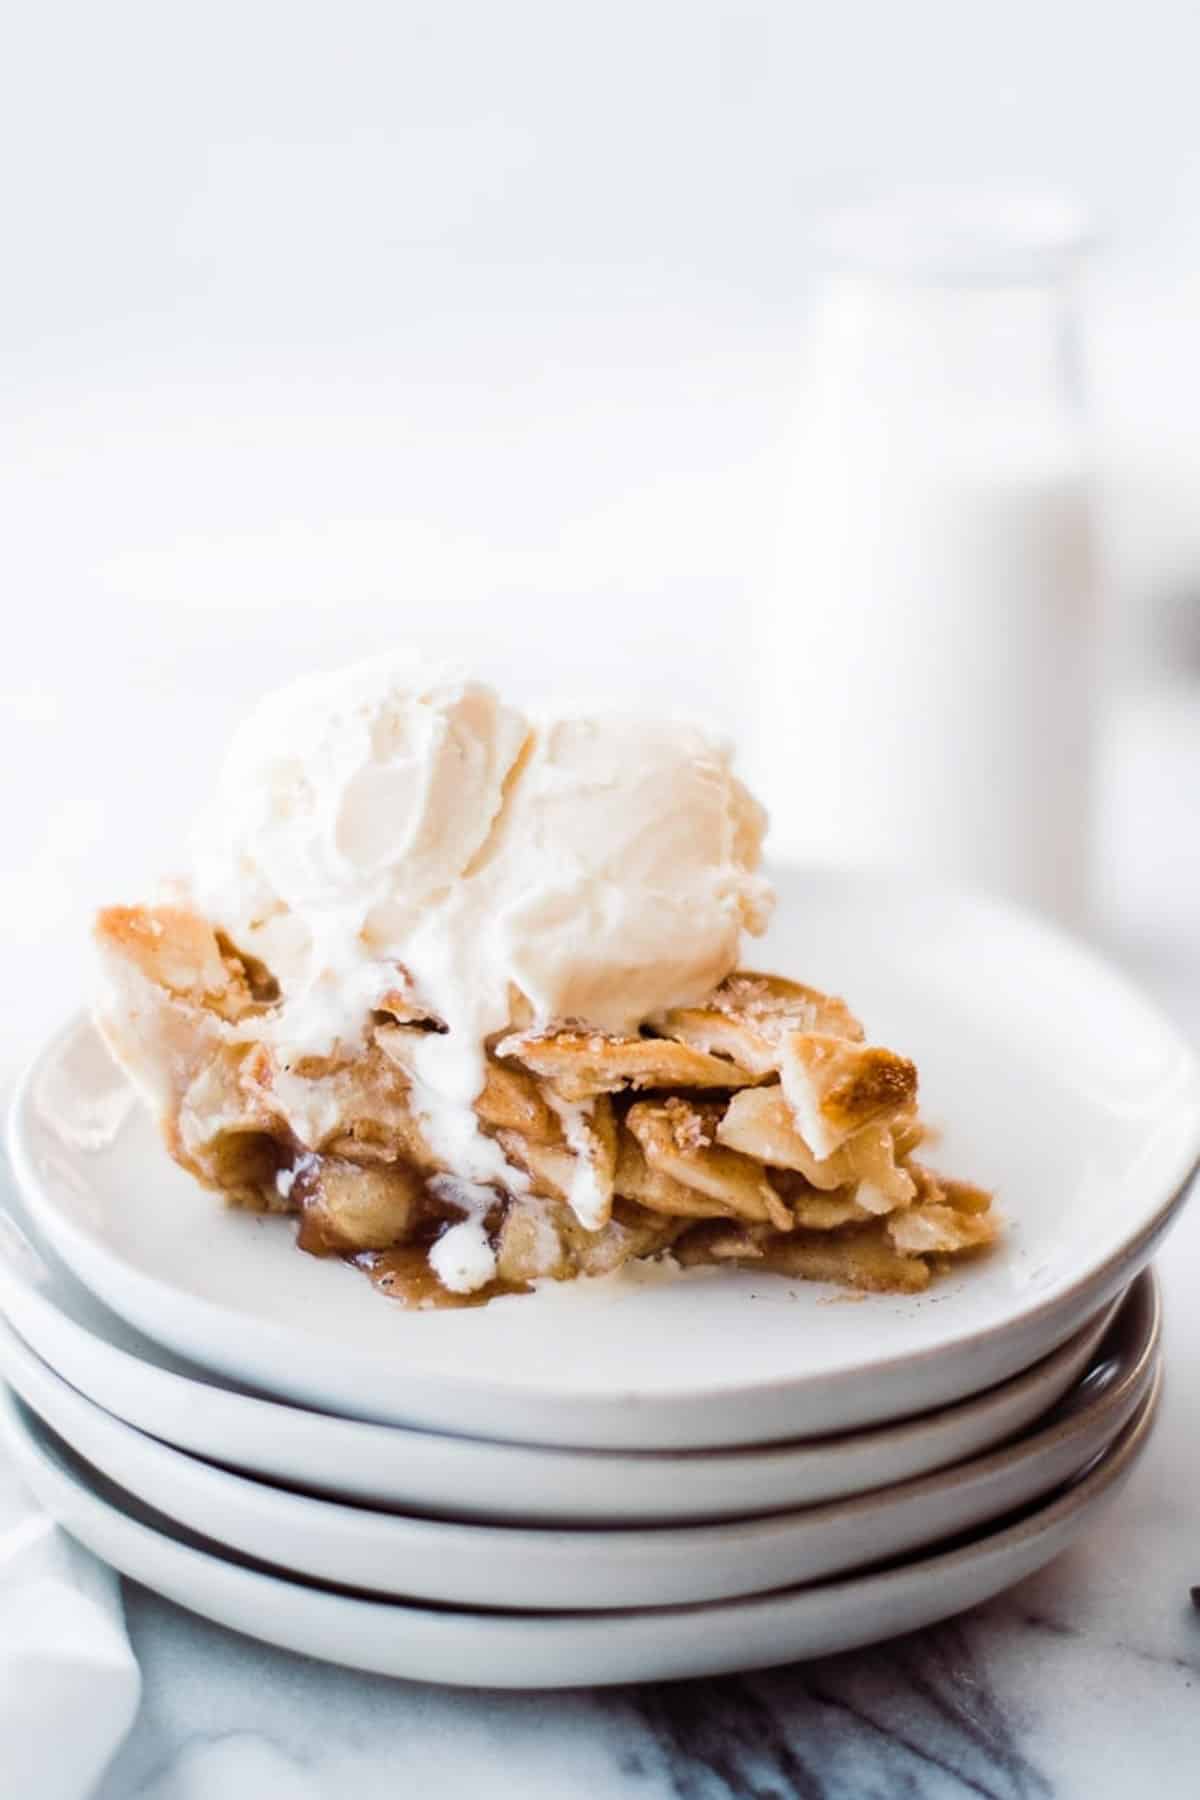 side view of apple pie with ice cream on top